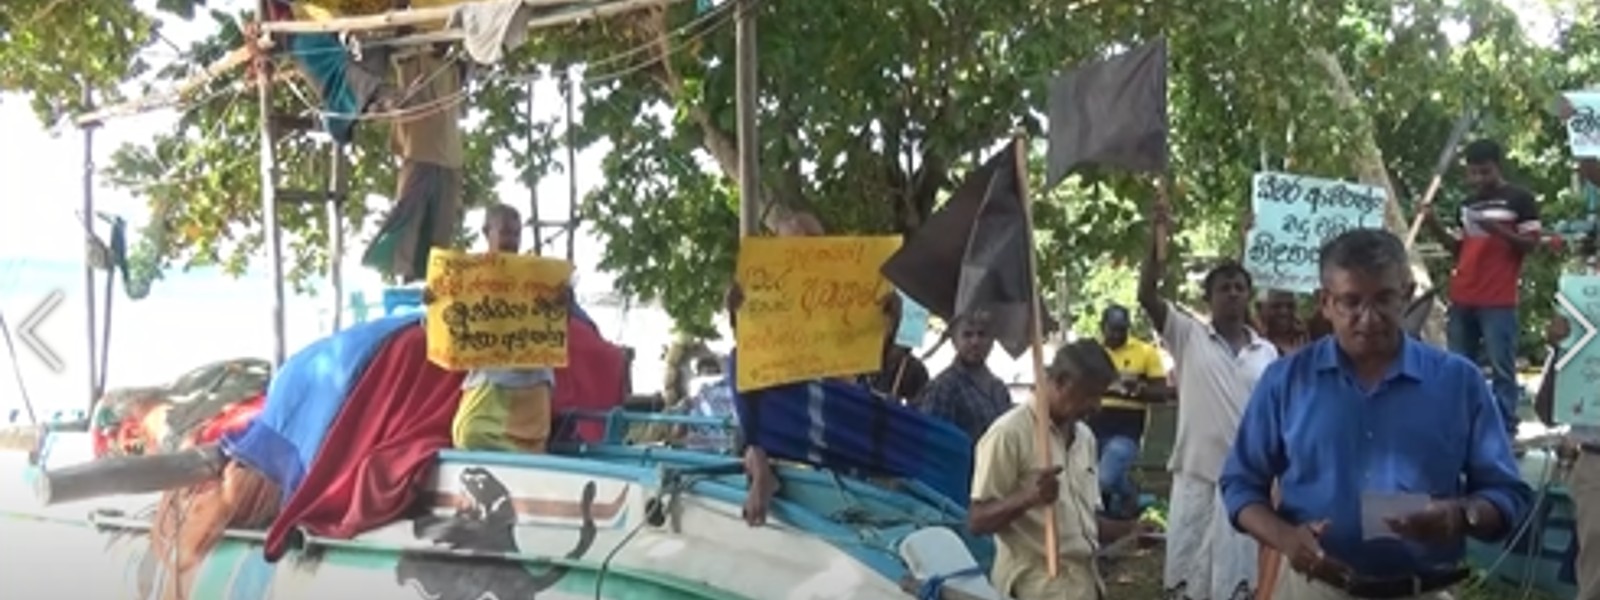 Fishermen protest against rising costs